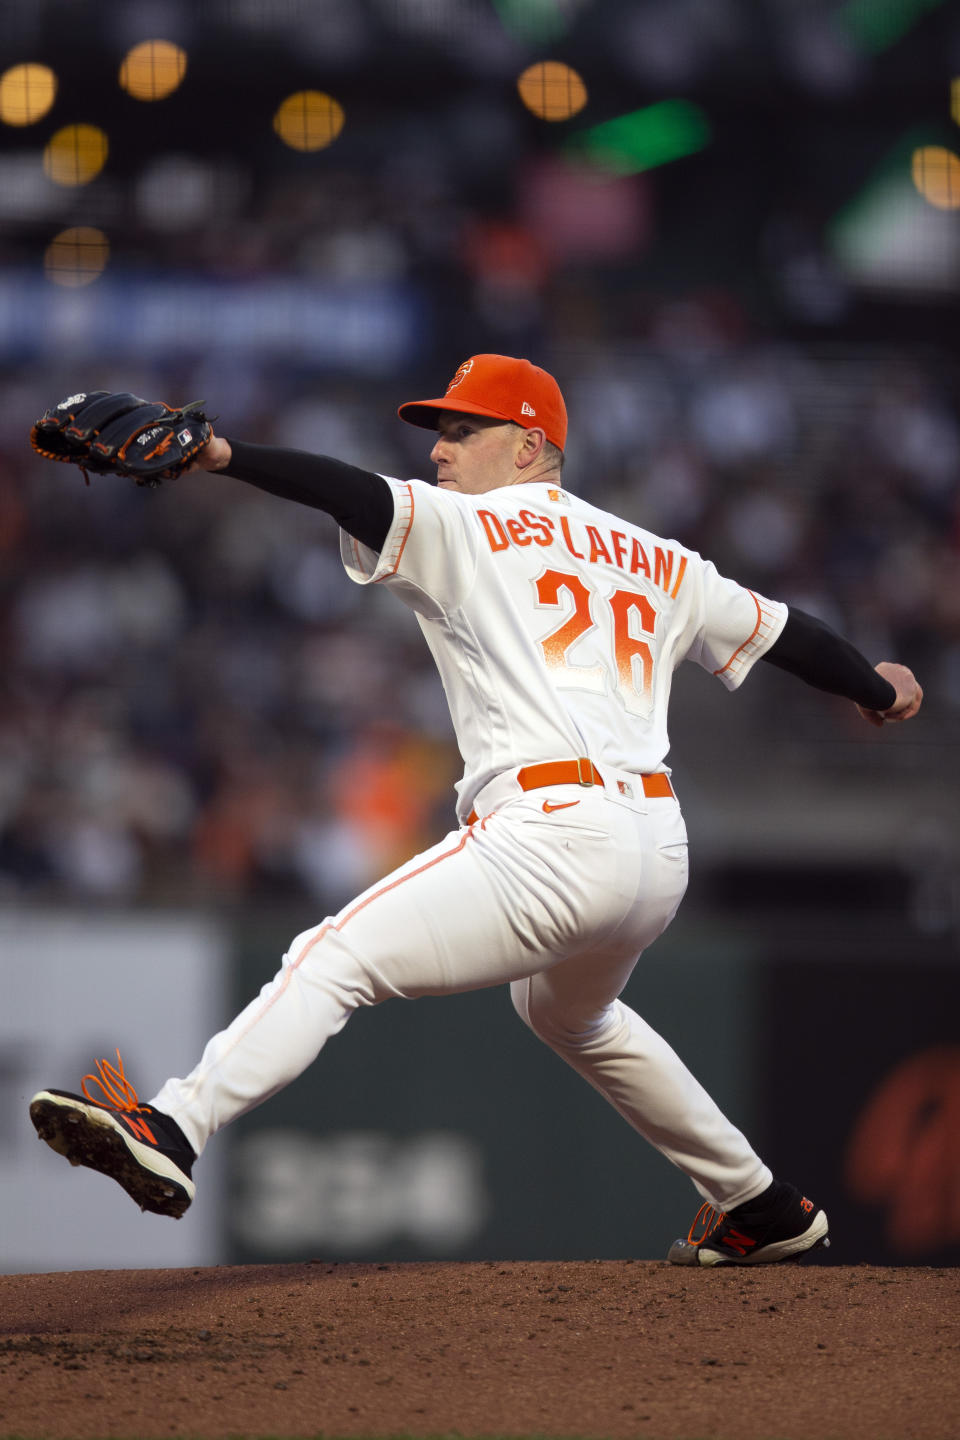 San Francisco Giants starting pitcher Anthony DeSclafani delivers against the San Diego Padres during the second inning of a baseball game, Tuesday, Sept. 14, 2021, in San Francisco. (AP Photo/D. Ross Cameron)